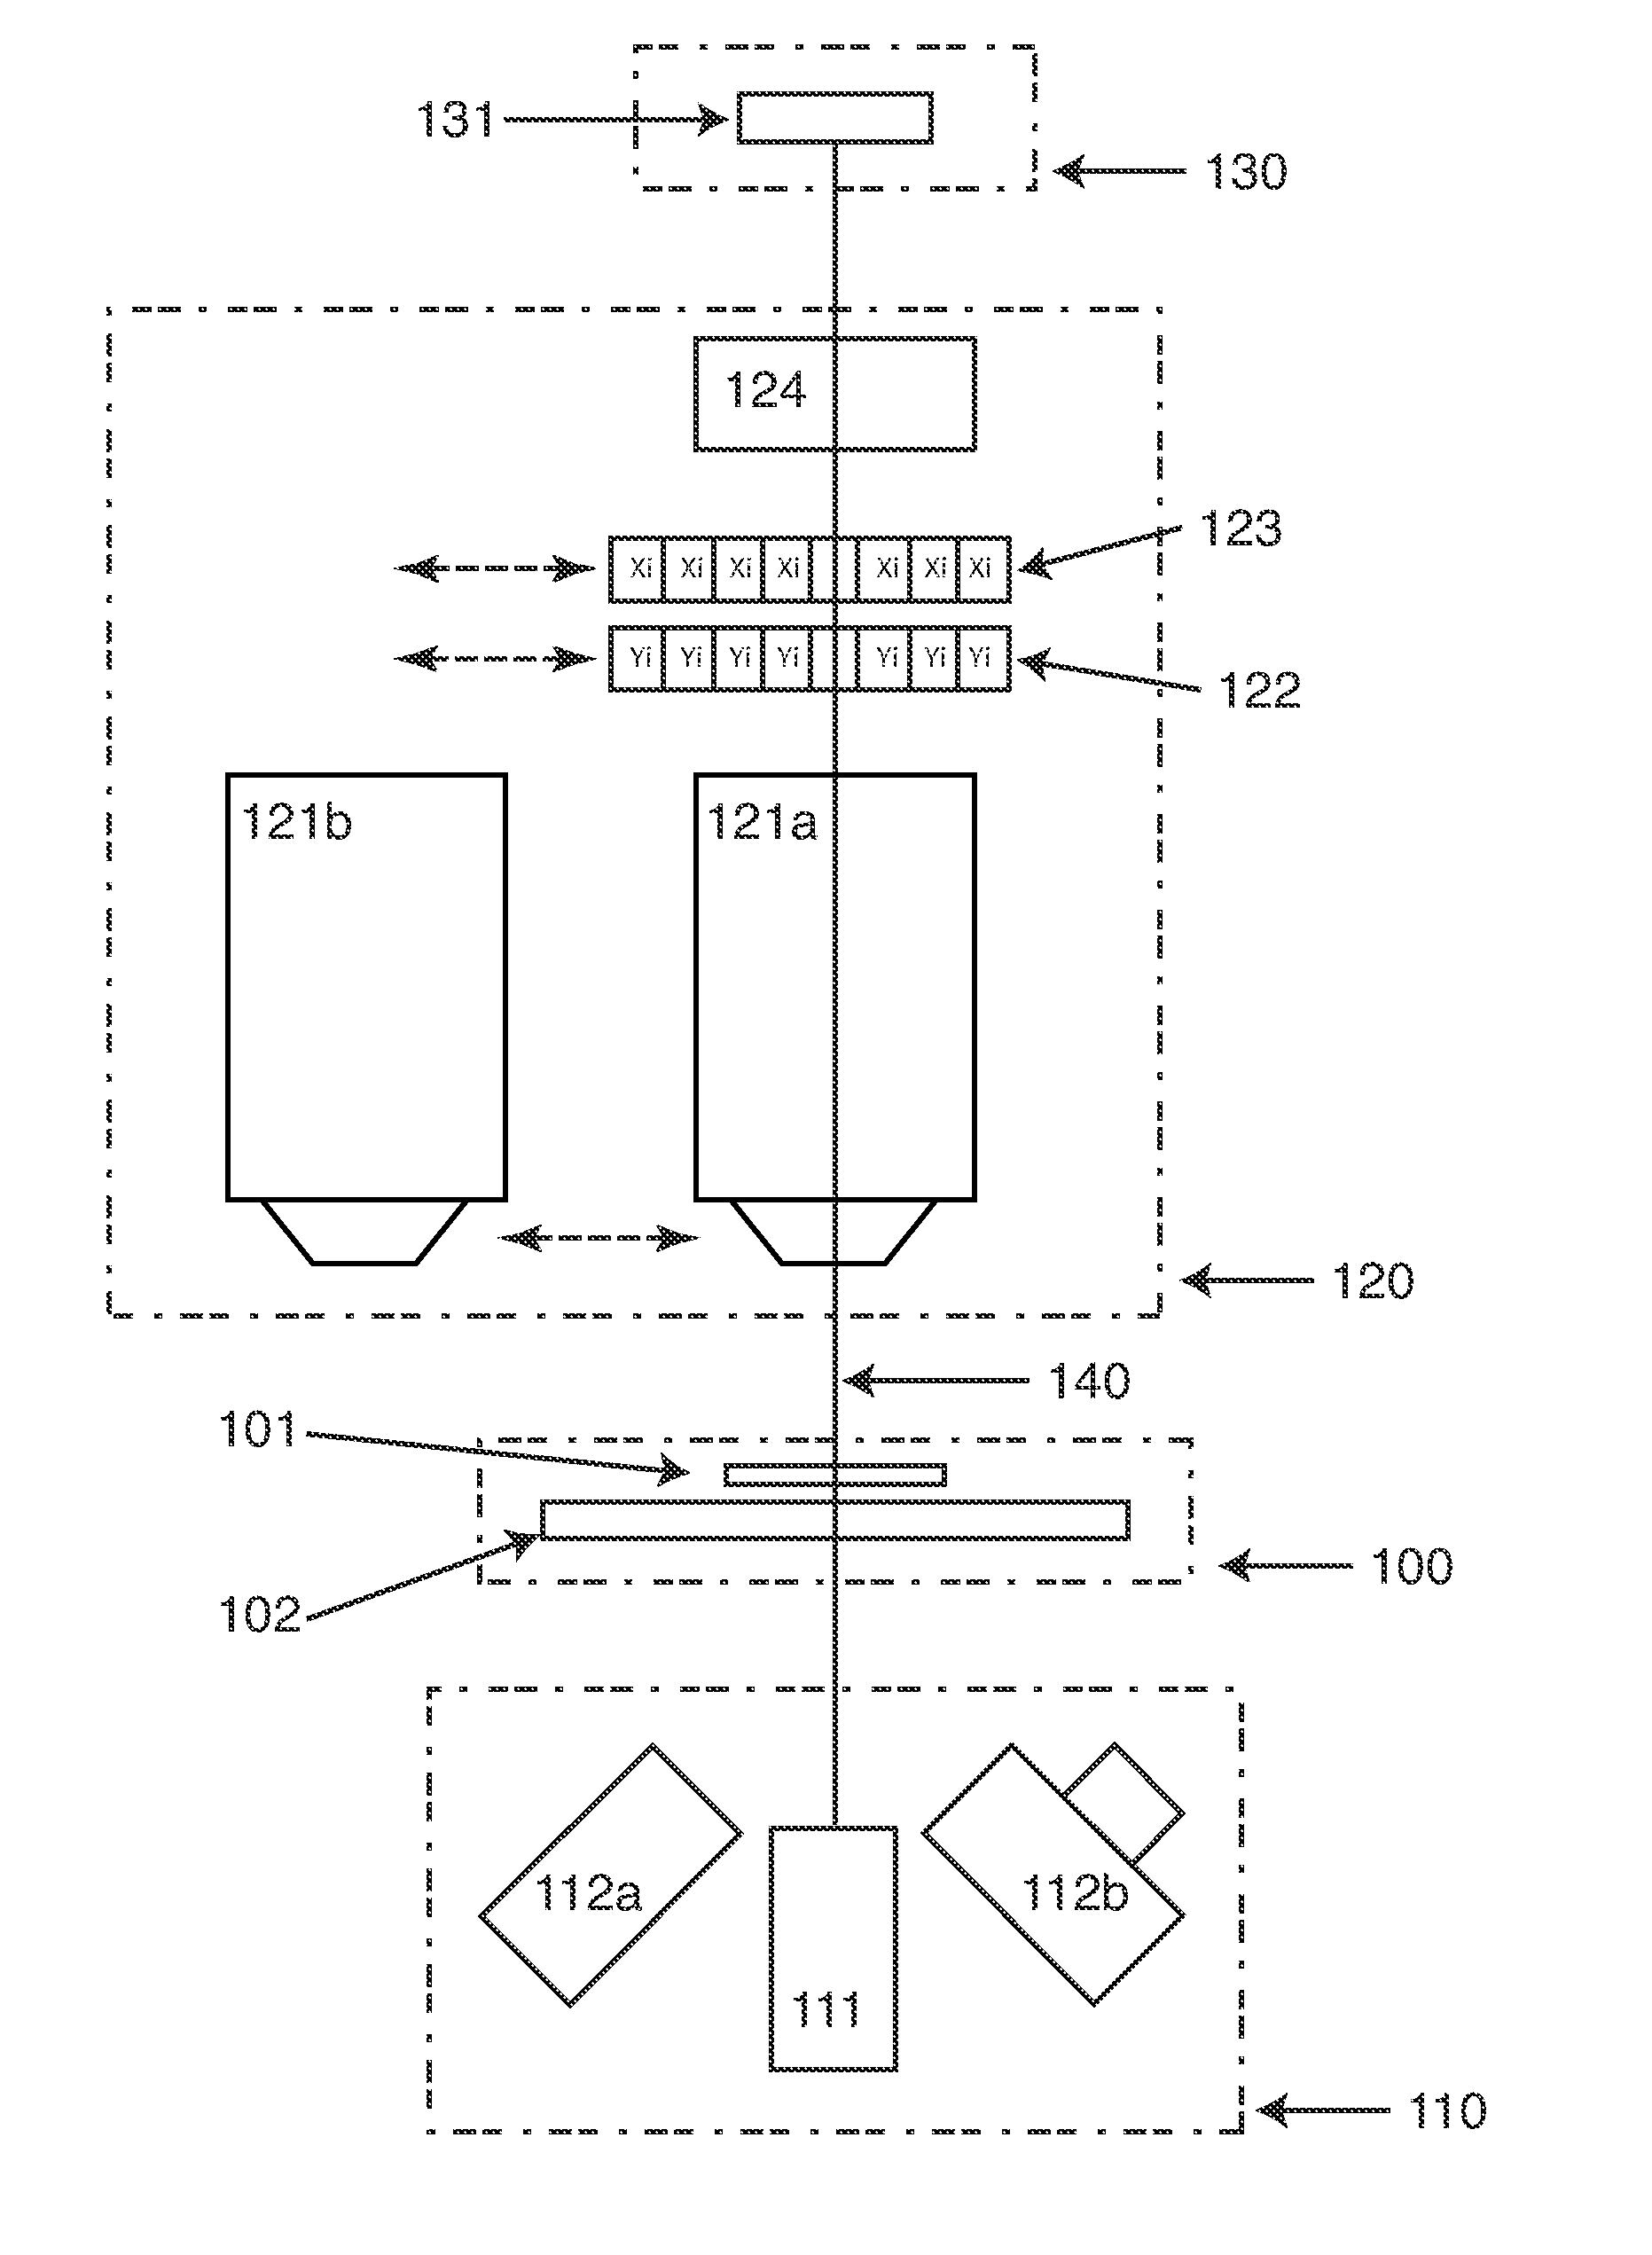 Image forming cytometer